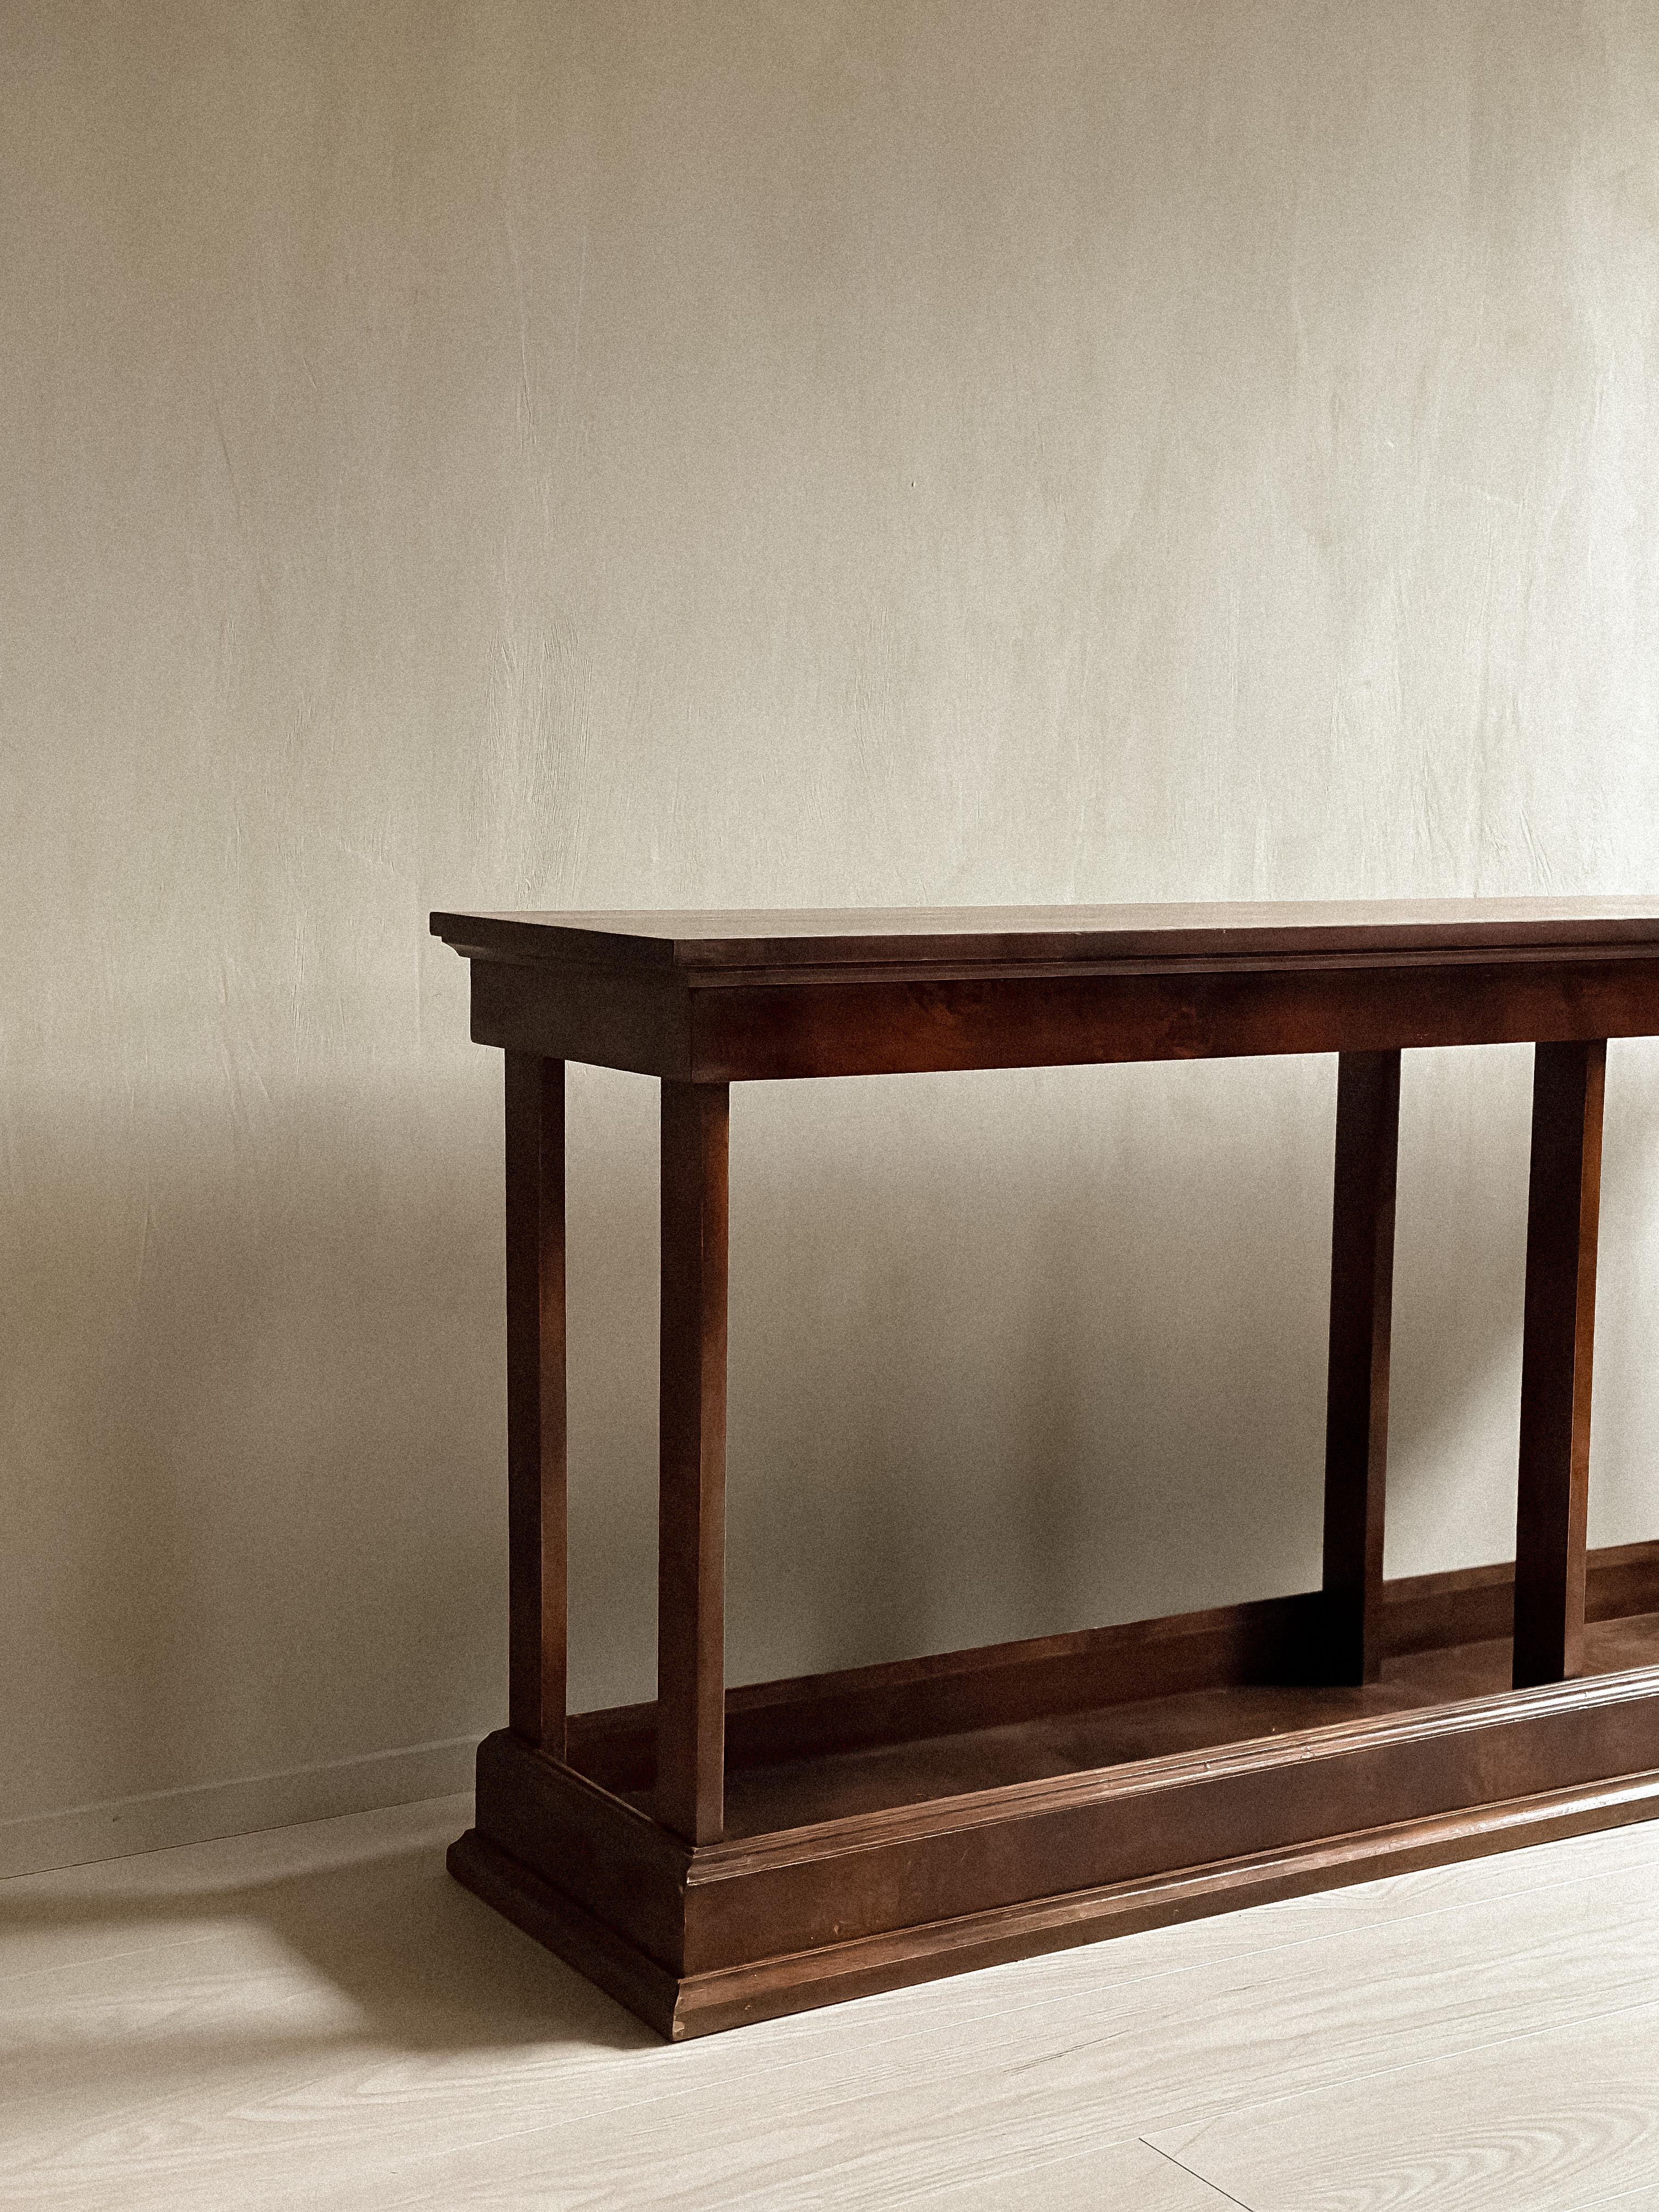 Mid-20th Century An Art Deco Console Table, Birch Wood, Scandinavia c. 1930s For Sale